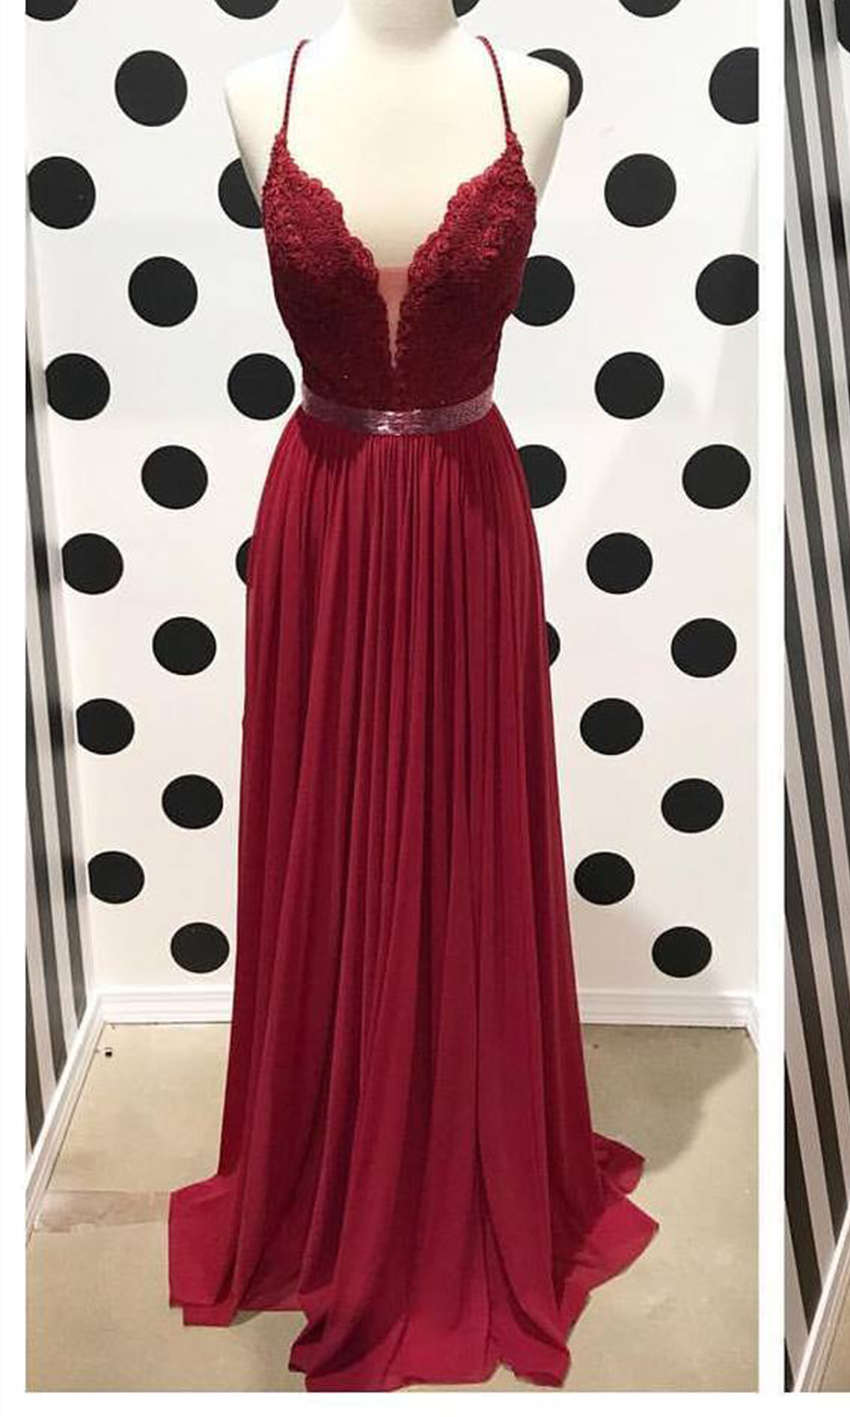 Backless Burgundy Lace Prom Dresses Long with Cross Straps P523